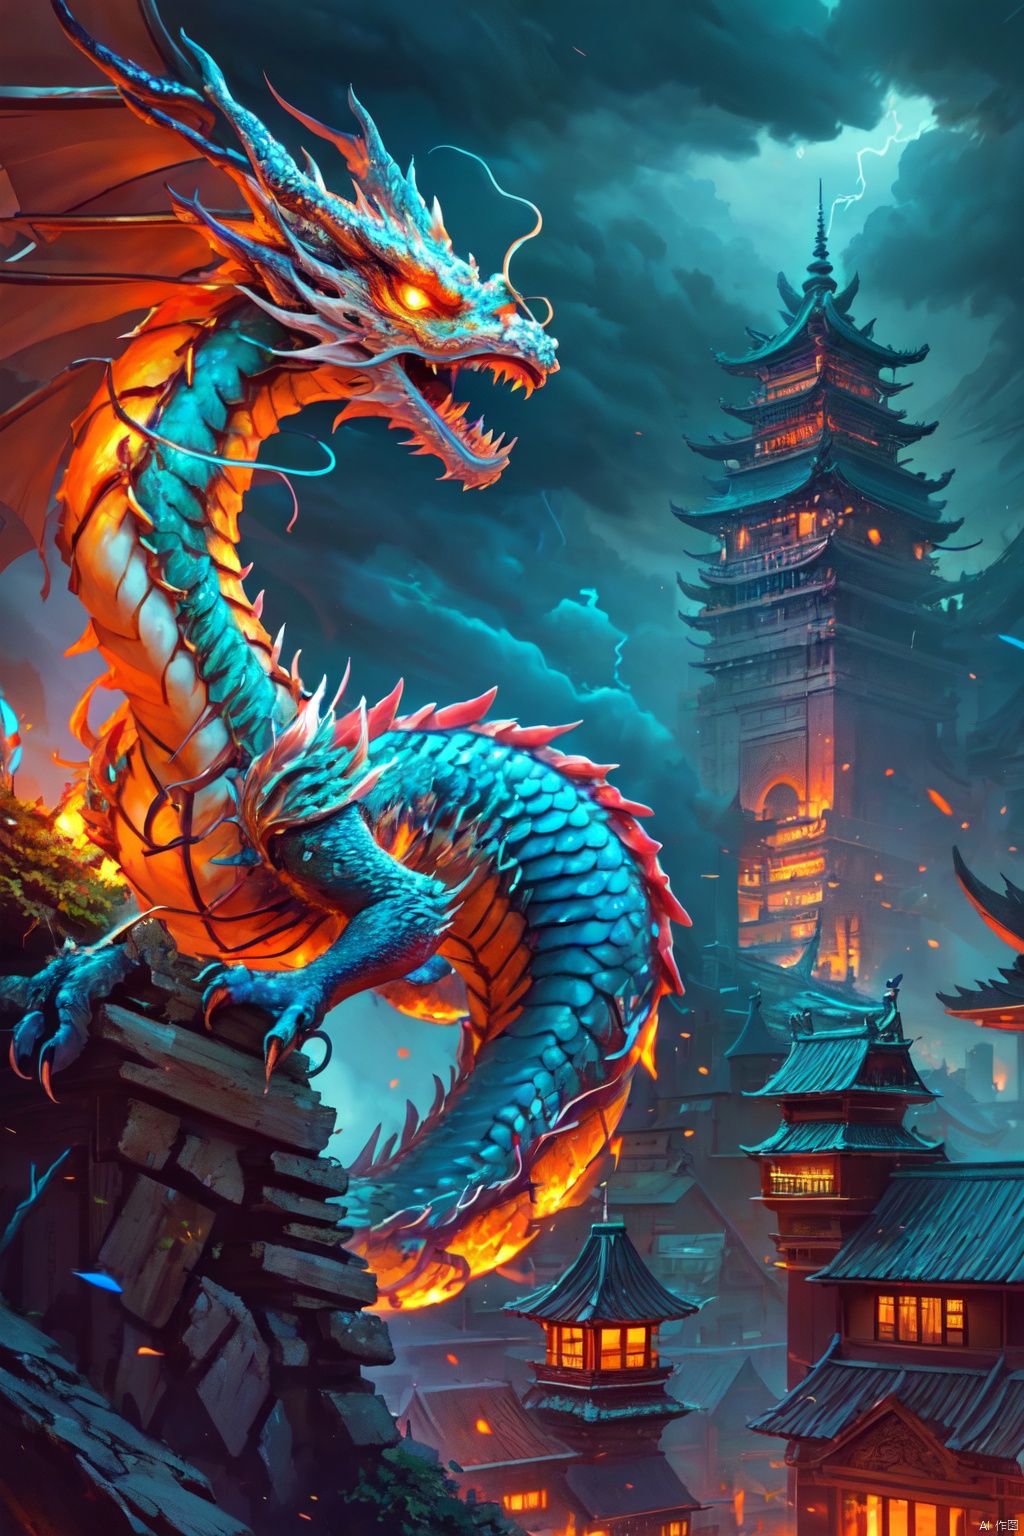  HDR, UHD, 8K, High detailed, best quality, masterpiece, (Cyber Theme) (Colorful, Neon Light) Chinese dragon - huge, (solo), no humans, glowing scales, sharp teeth, 1 pair of sharp angles, clouds, lightning, mysterious, power, ancient, legends, oriental, divine, beast, classical, architecture, traditional, architecture, wood, structure, architecture, courtyard, architecture, roof, design, brick, stone, structure, garden, design, cultural, characteristics, building, materials, architectural, aestheticsdragons, breath, scales, flame, eyes, deep, magic, wings, body, dignity, guardians